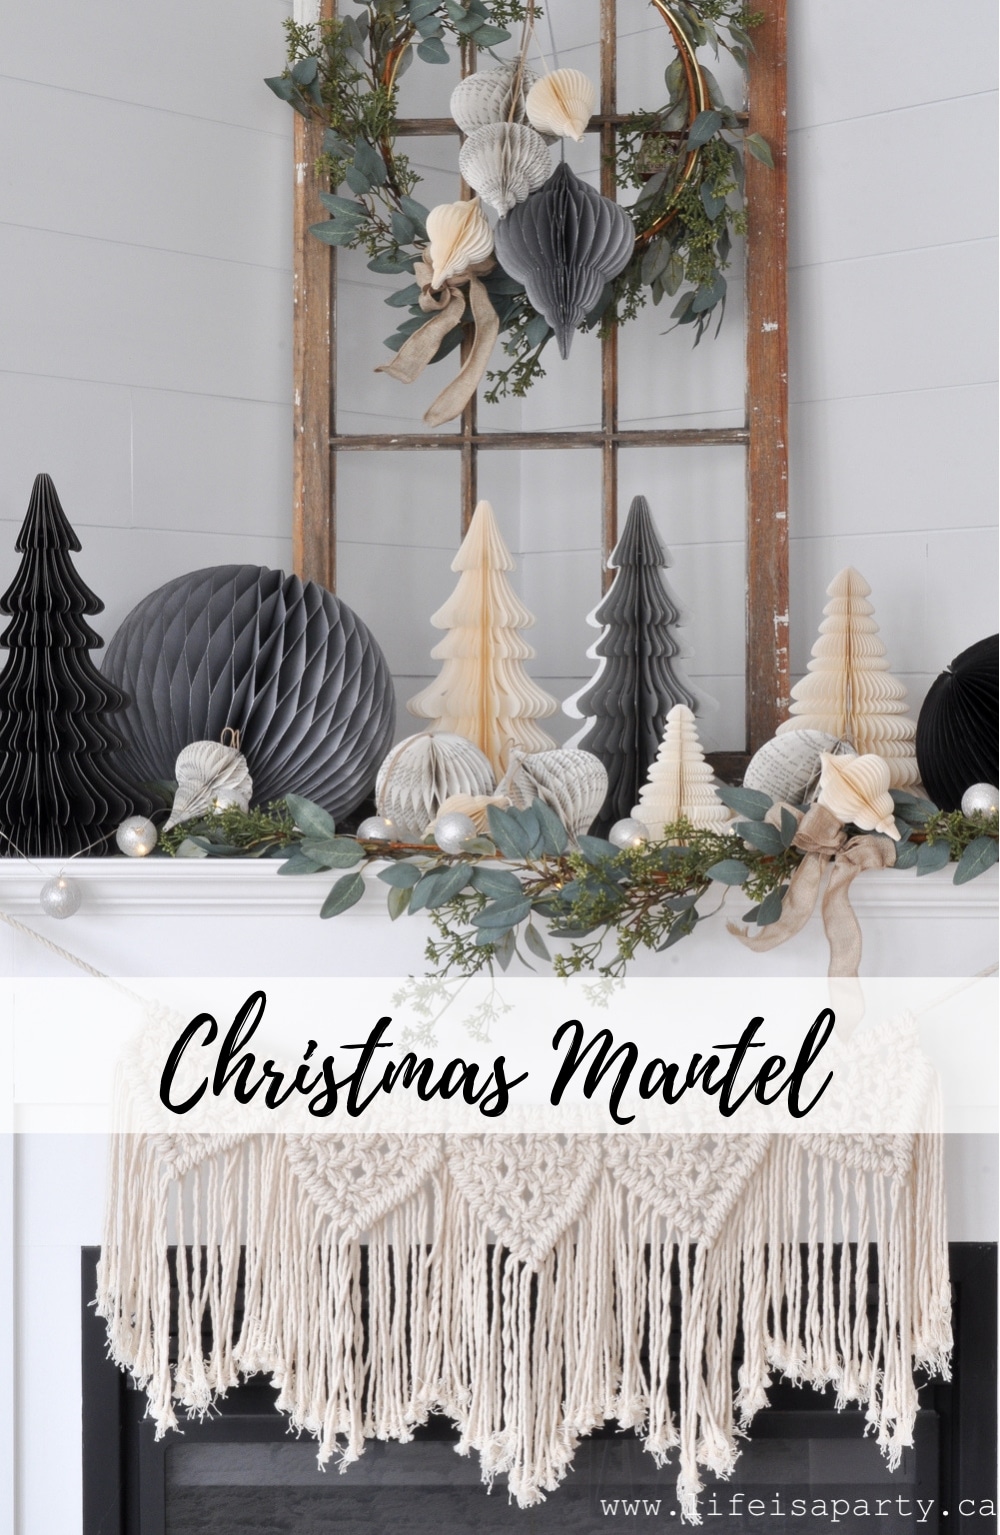 Rustic Christmas Mantel: paper honeycomb ornaments, balls, and Christmas tree decorations, with eucalyptus garland and twinkle lights.